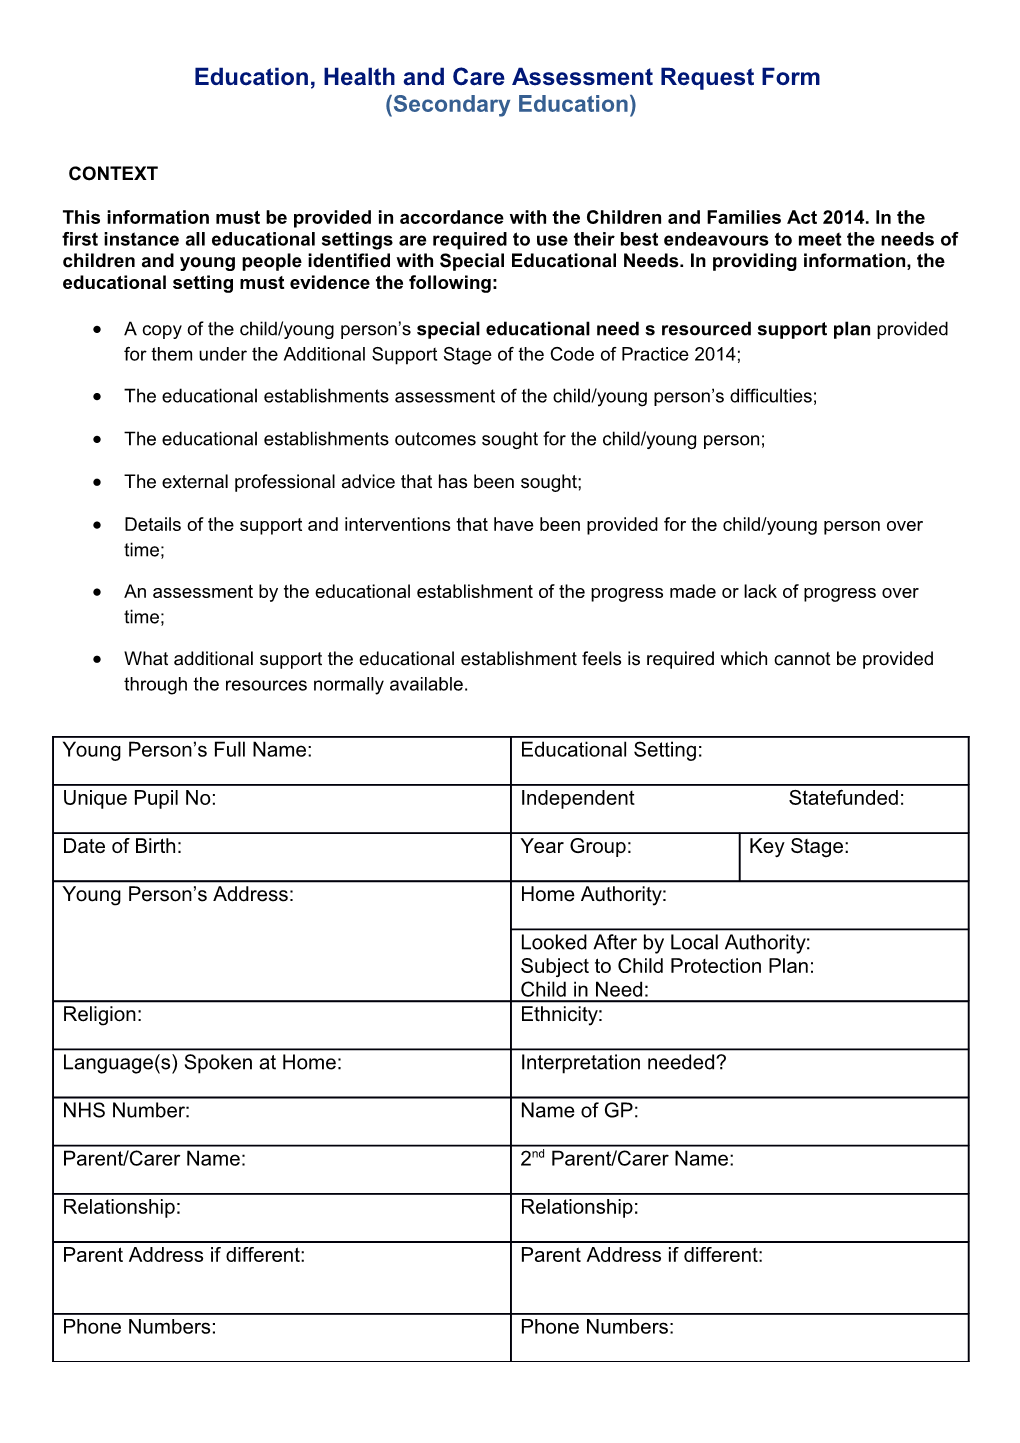 Education, Health and Care Assessment Request Form